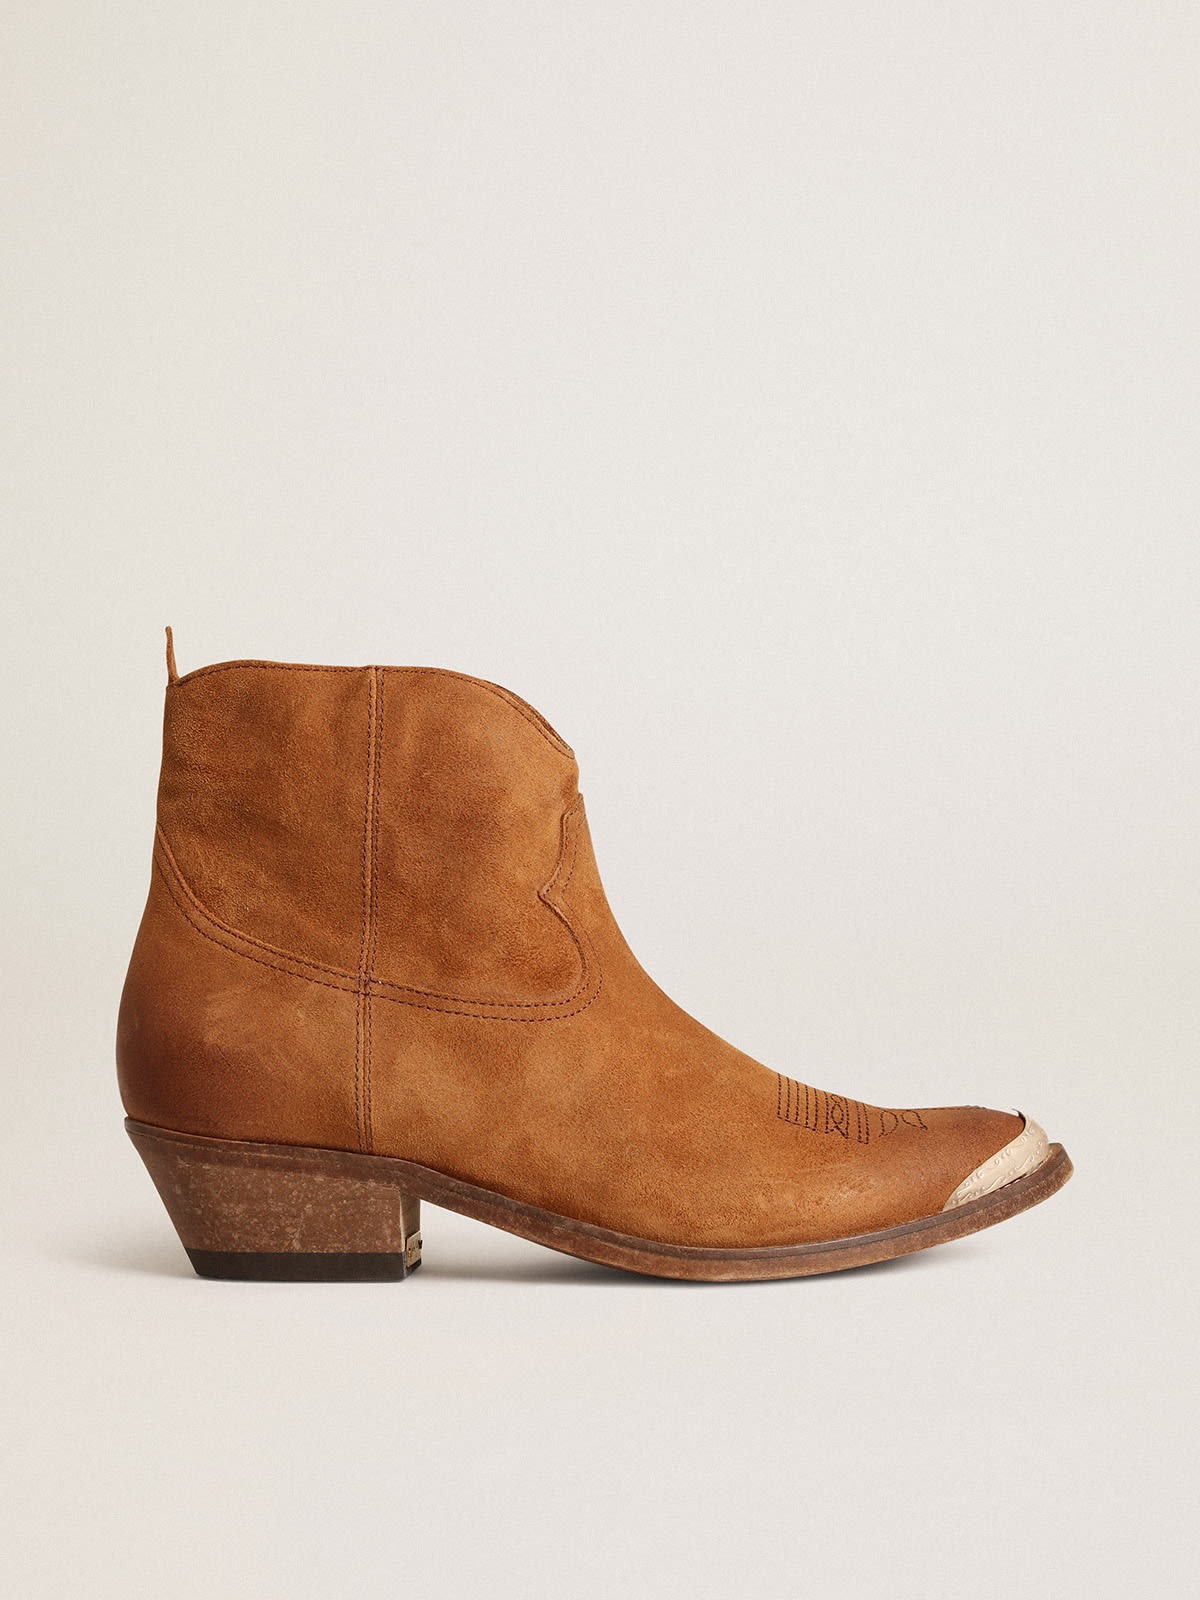 Young ankle boots in cognac-colored suede - 1